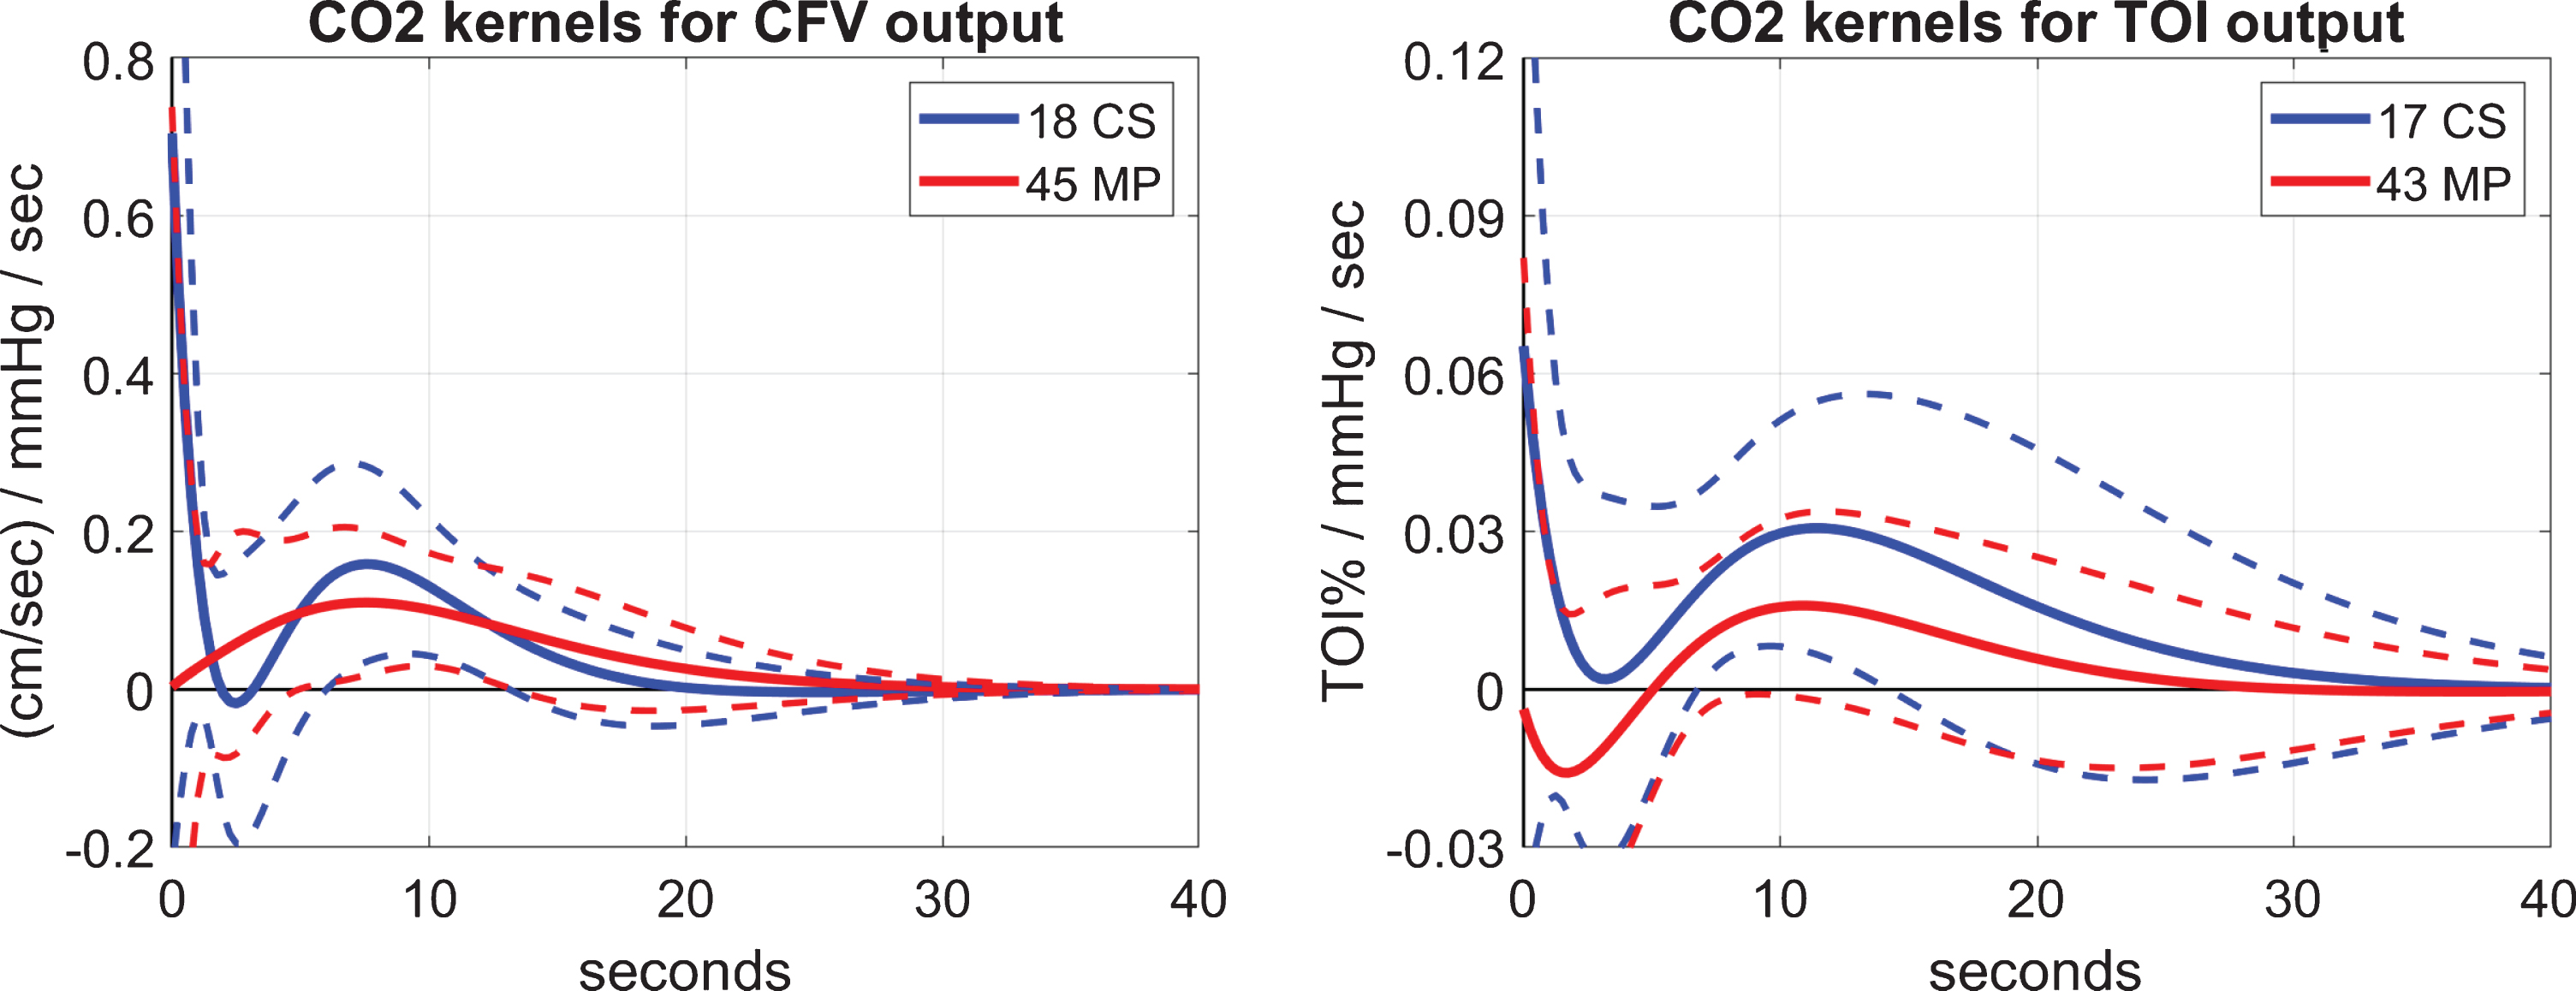 Average kernel estimates for the CO2 input (±1 SD bounds marked with dotted lines) over 18 or 17 CS (blue line) and 45 or 43 MP (red line), for CFV (left) or TOI (right) output, respectively.